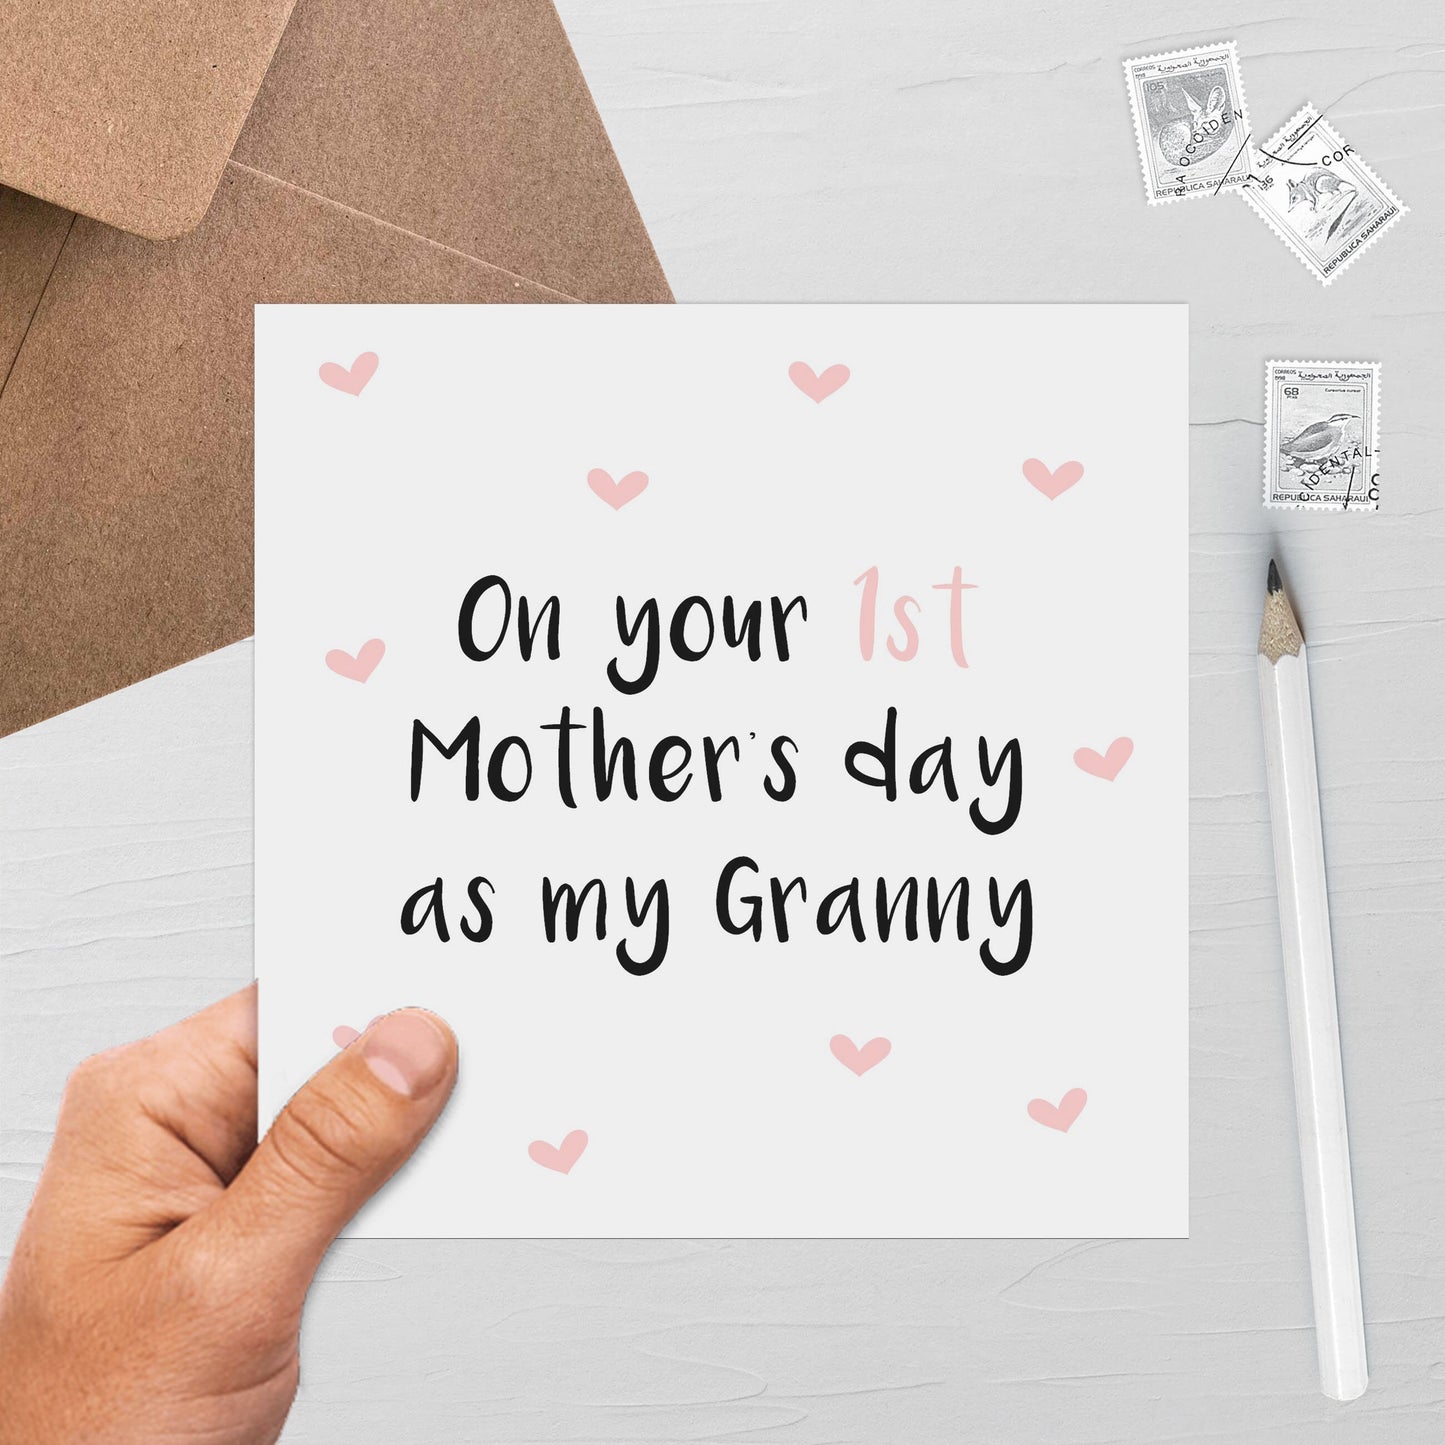 Granny On Your 1st Mother's Day, Cute Card For Grandparent